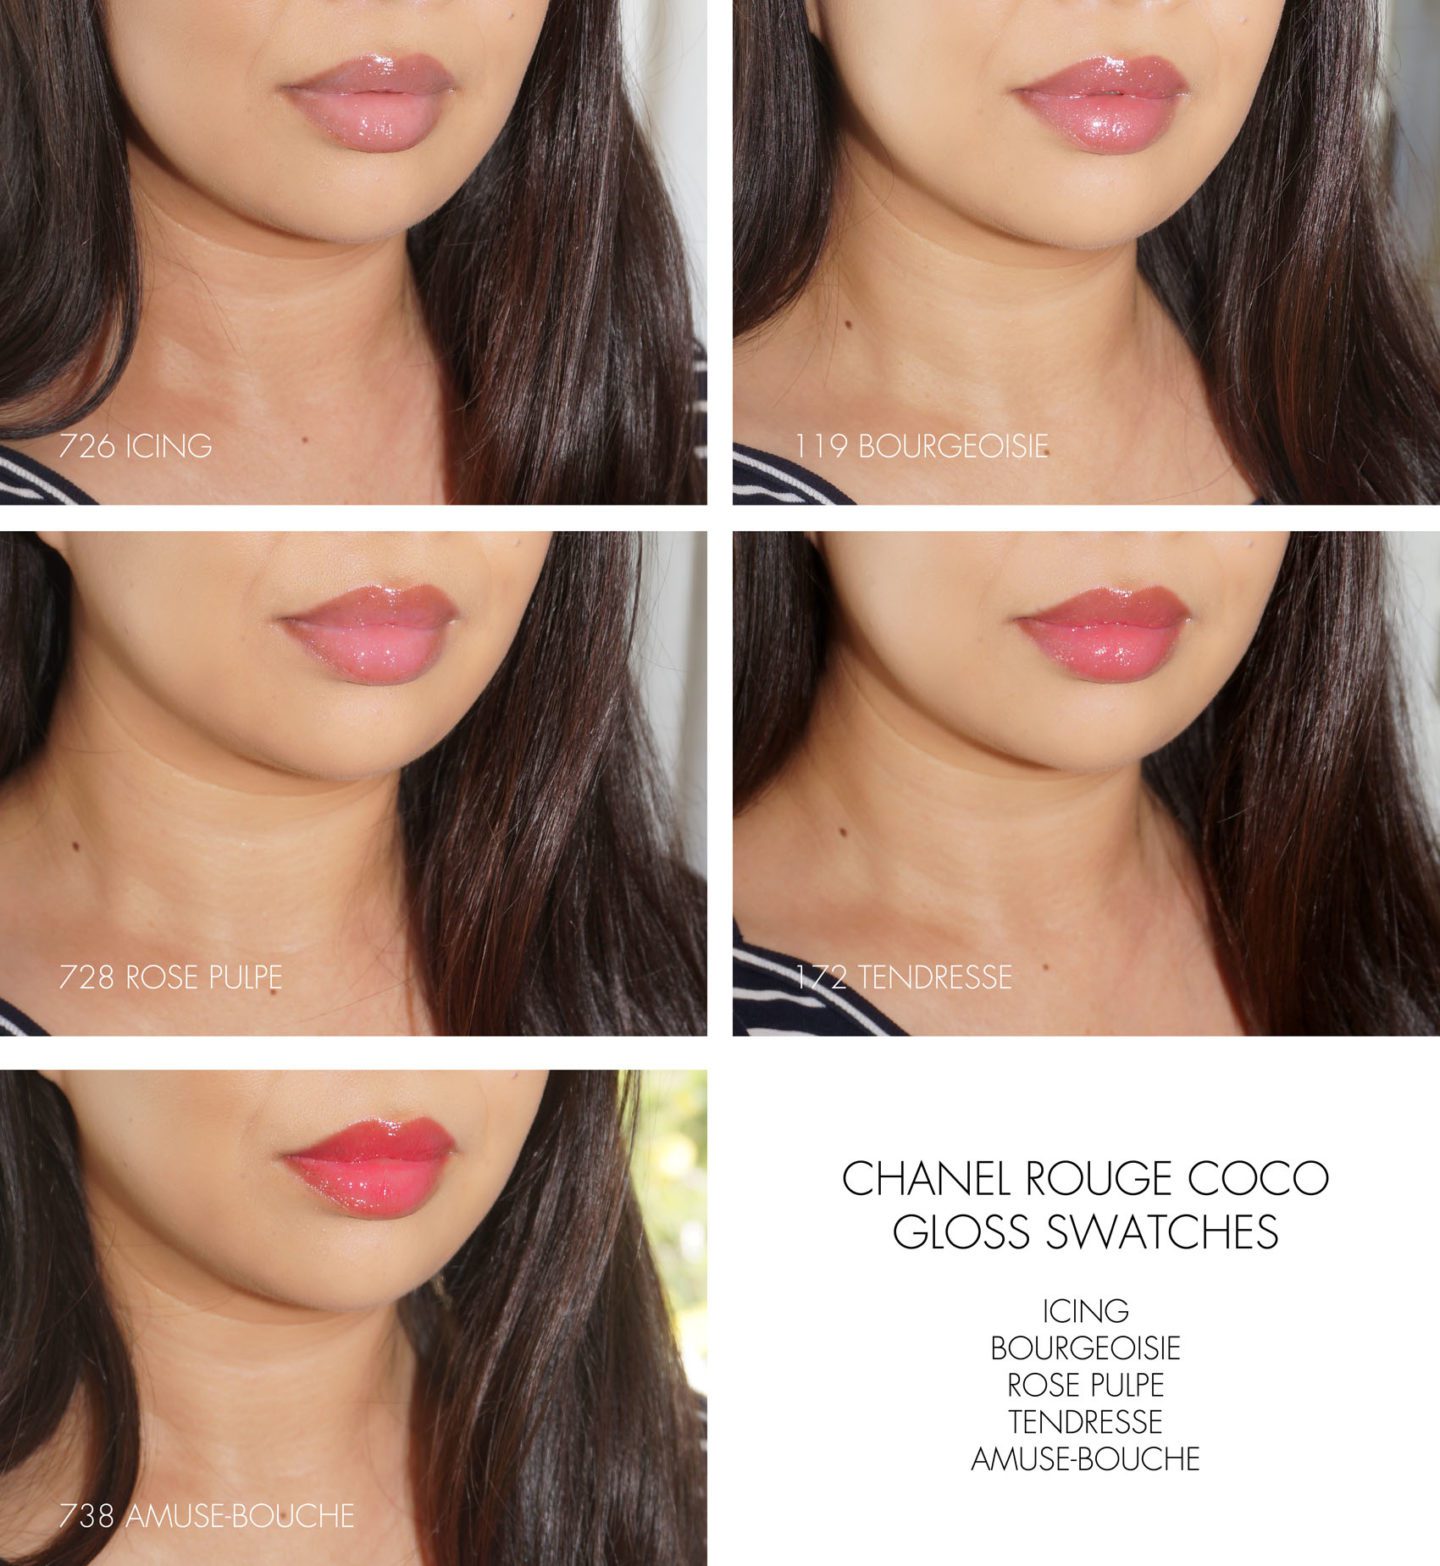 Chanel Rouge Coco Gloss in Icing, Bourgeoisie, Rose Pulpe, Tendresse, Amuse-Bouche